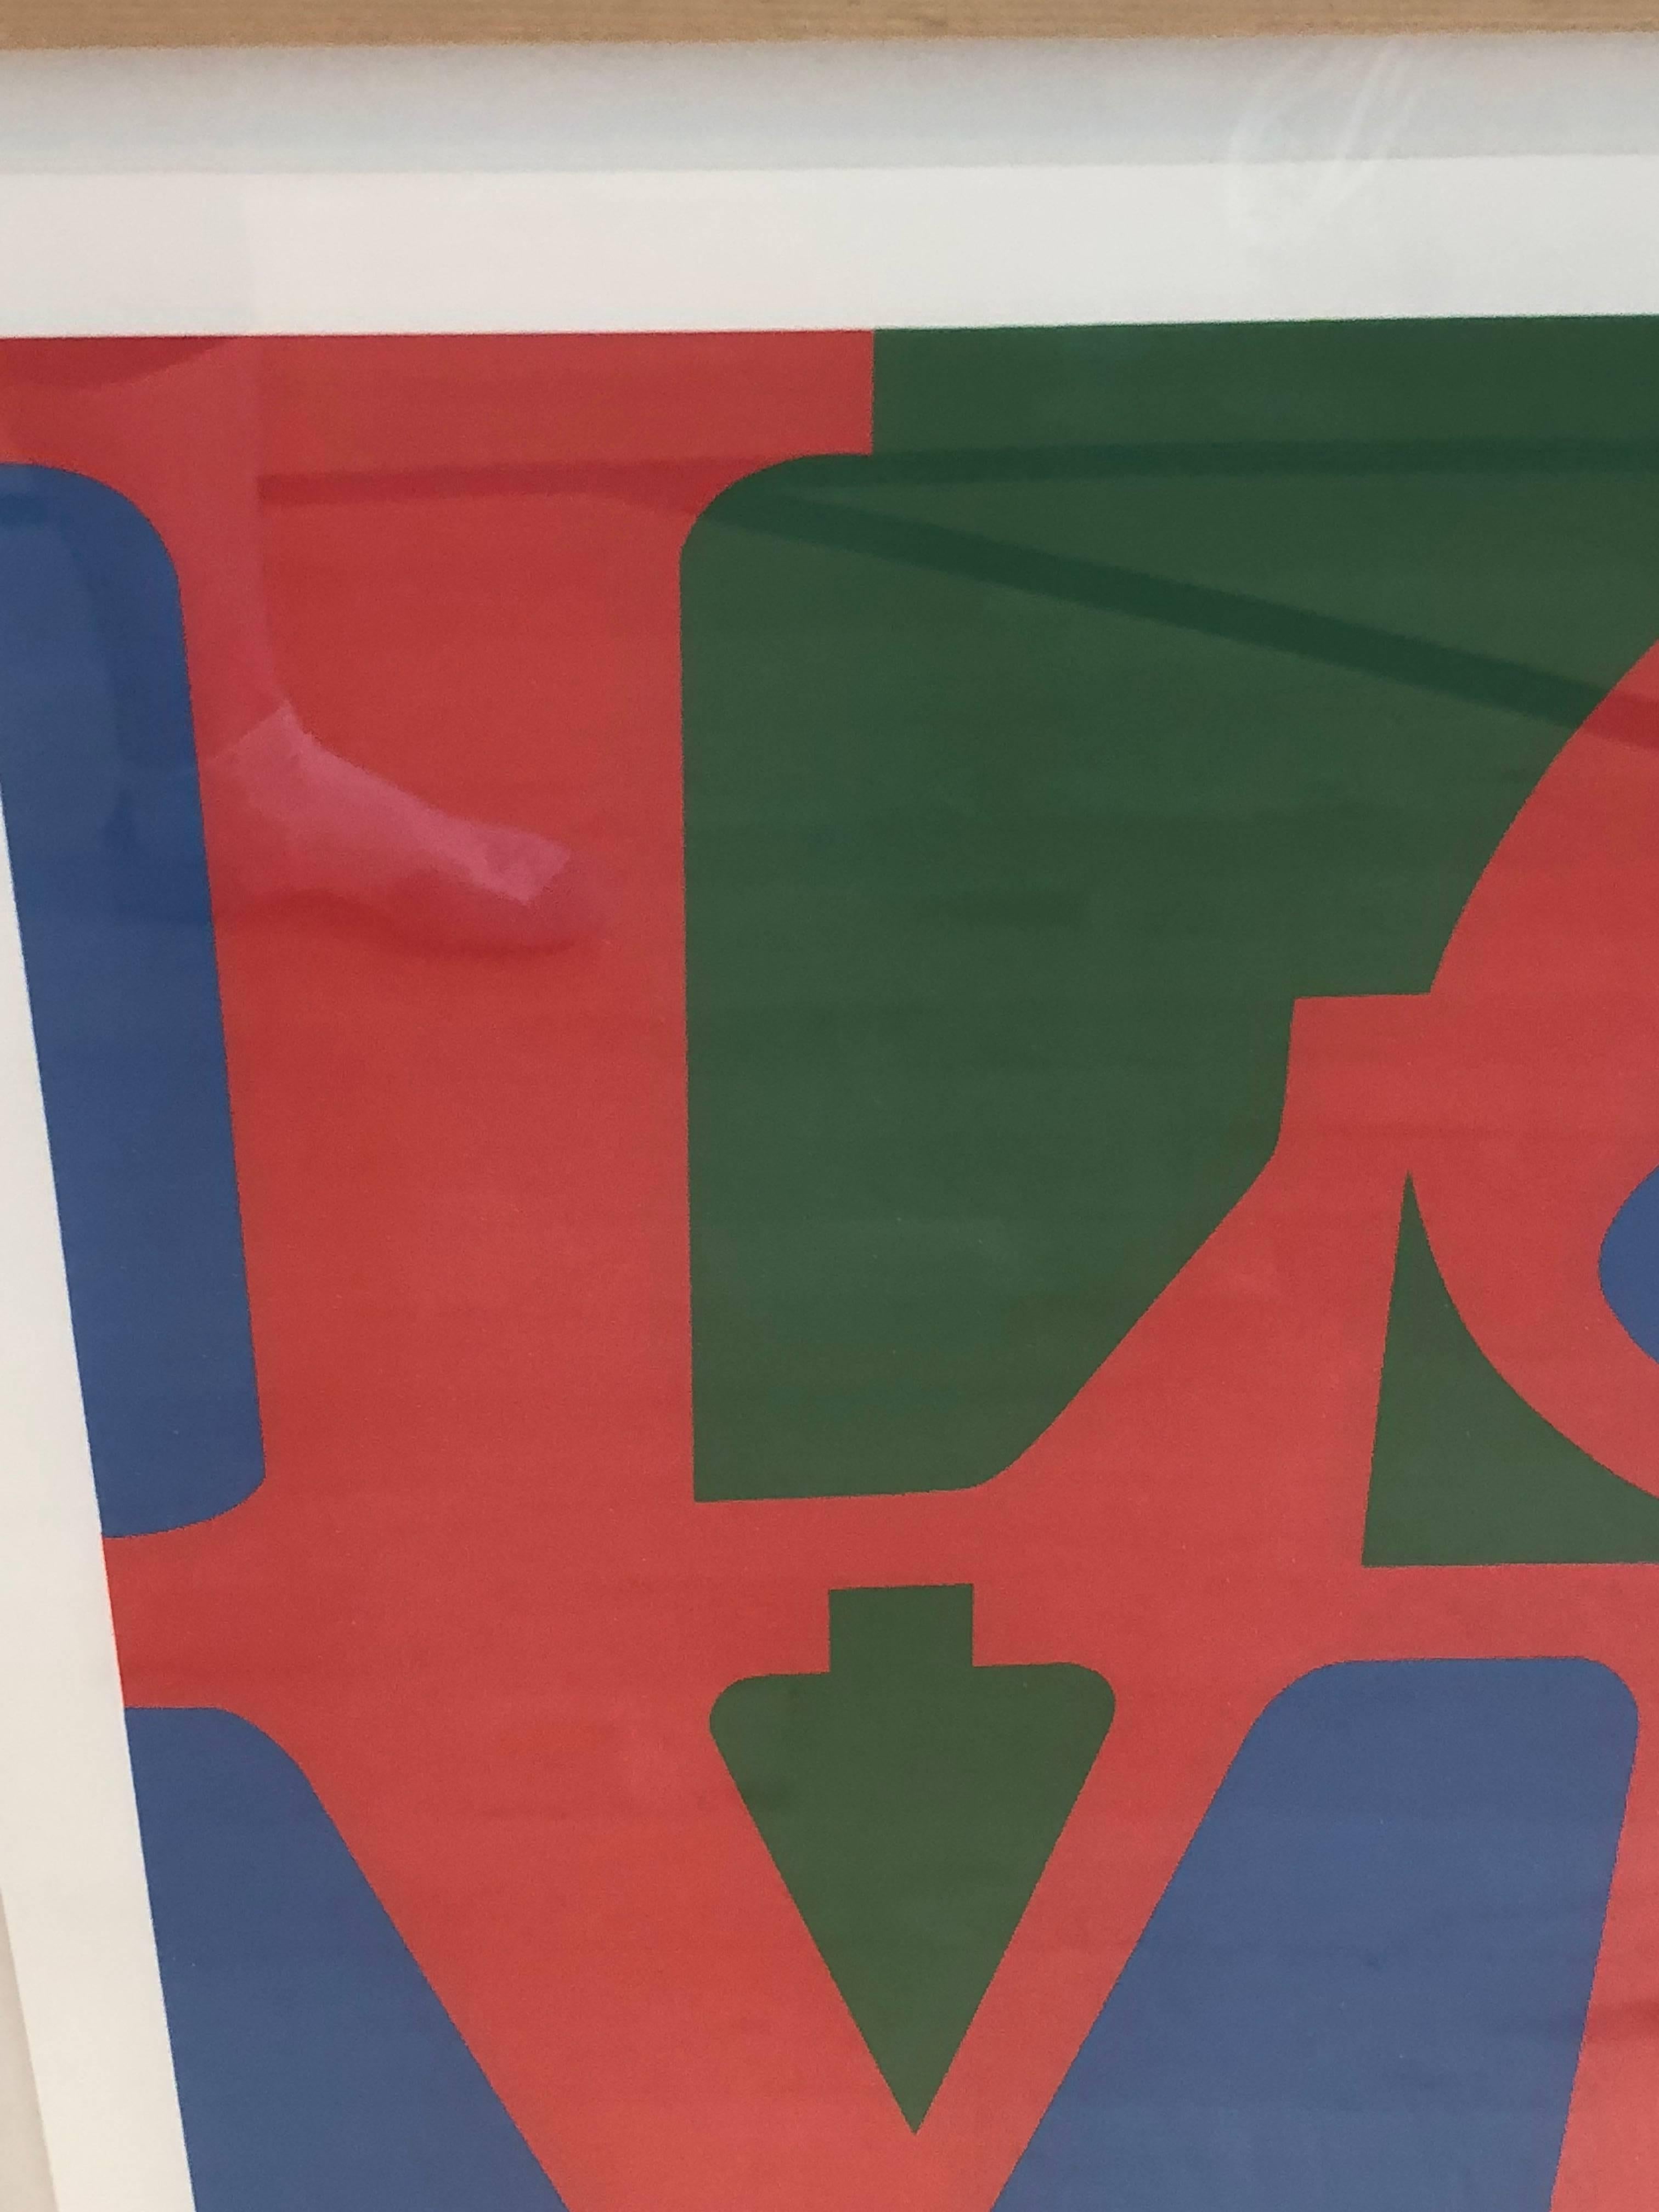 Post-Modern 20th Century Pop Art Signed and Numbered Robert Indiana, LOVE, 1996